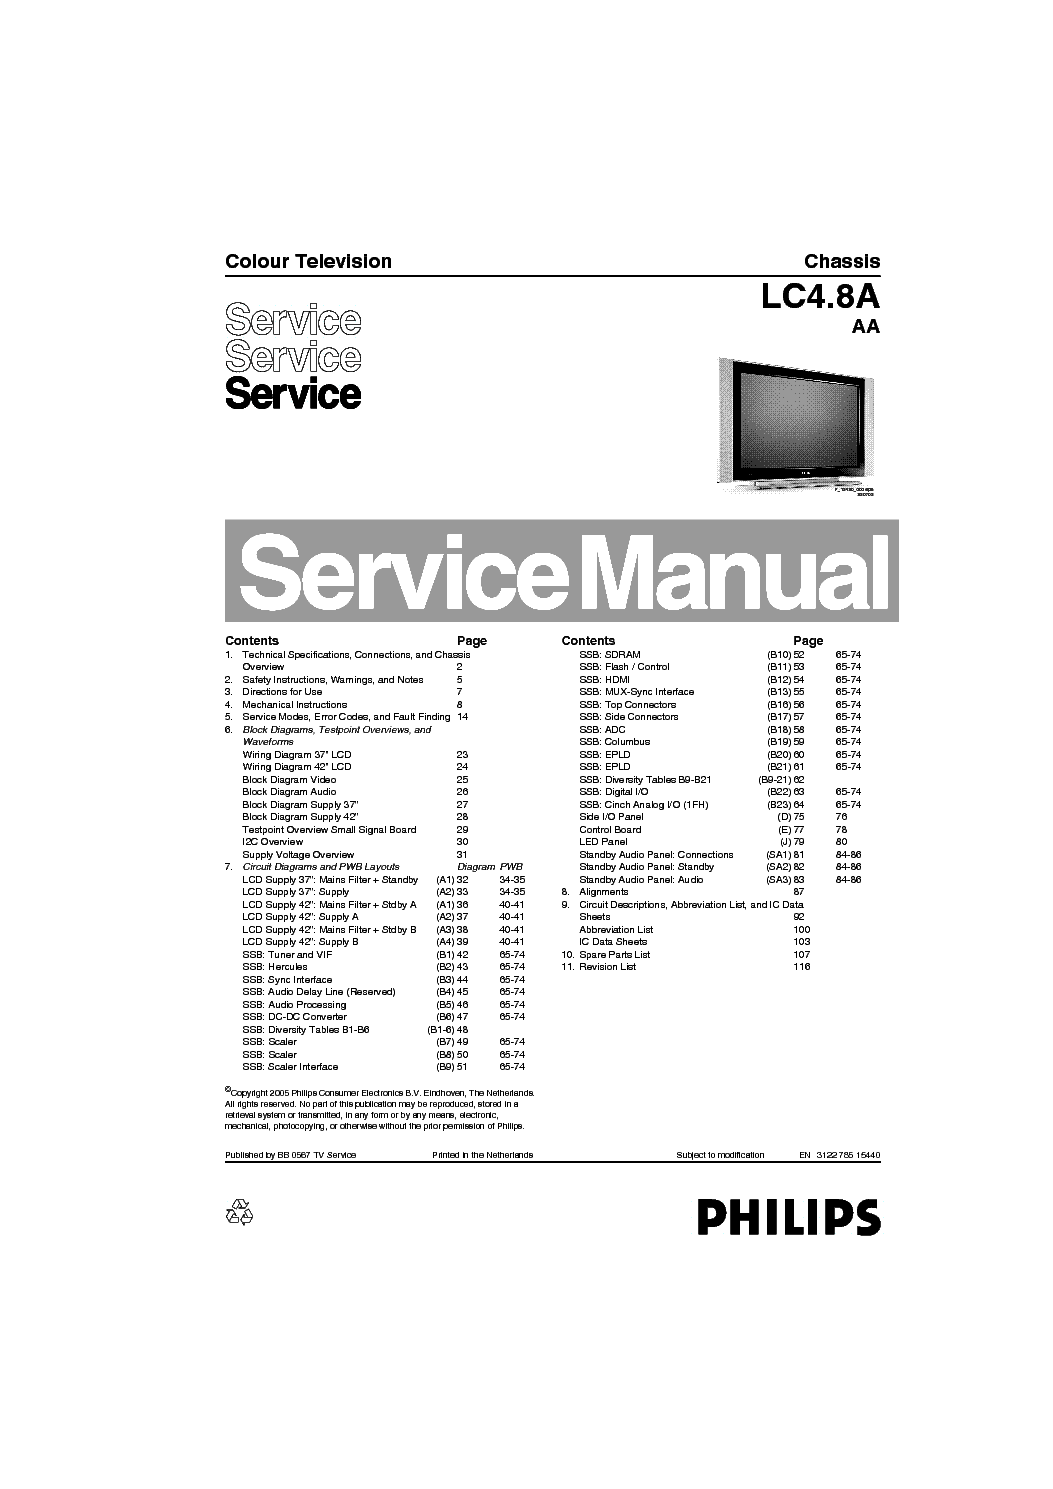 PHILIPS 37PF7320.69 LC4.8AAA service manual (1st page)